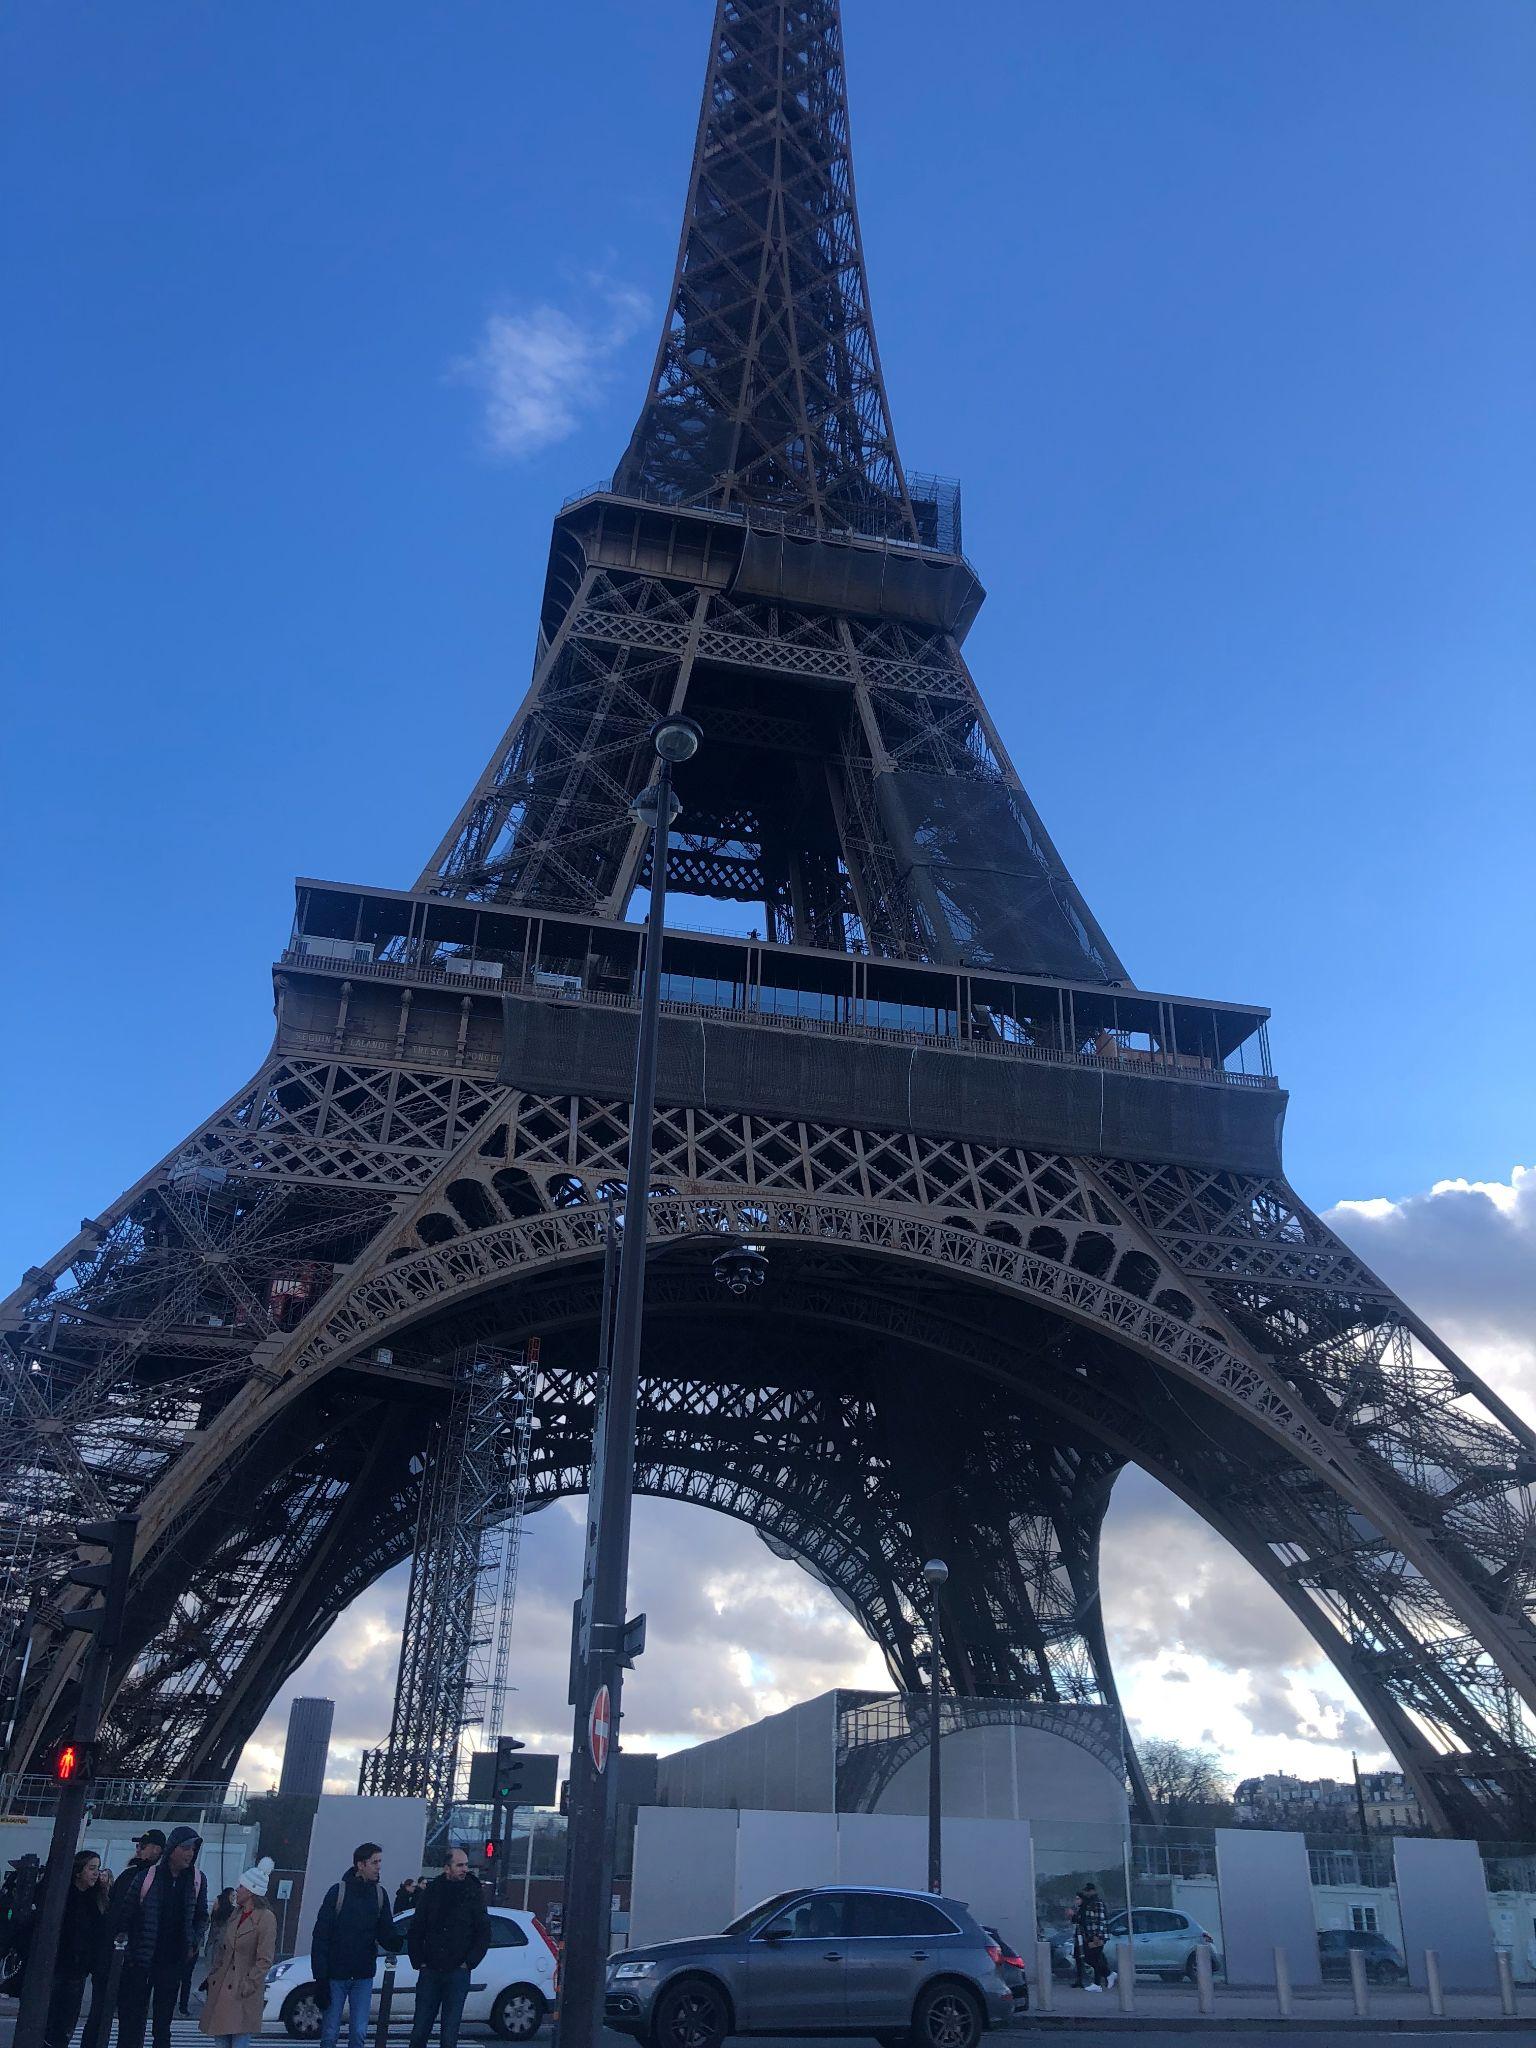 Last day: Visiting Eiffel Tower